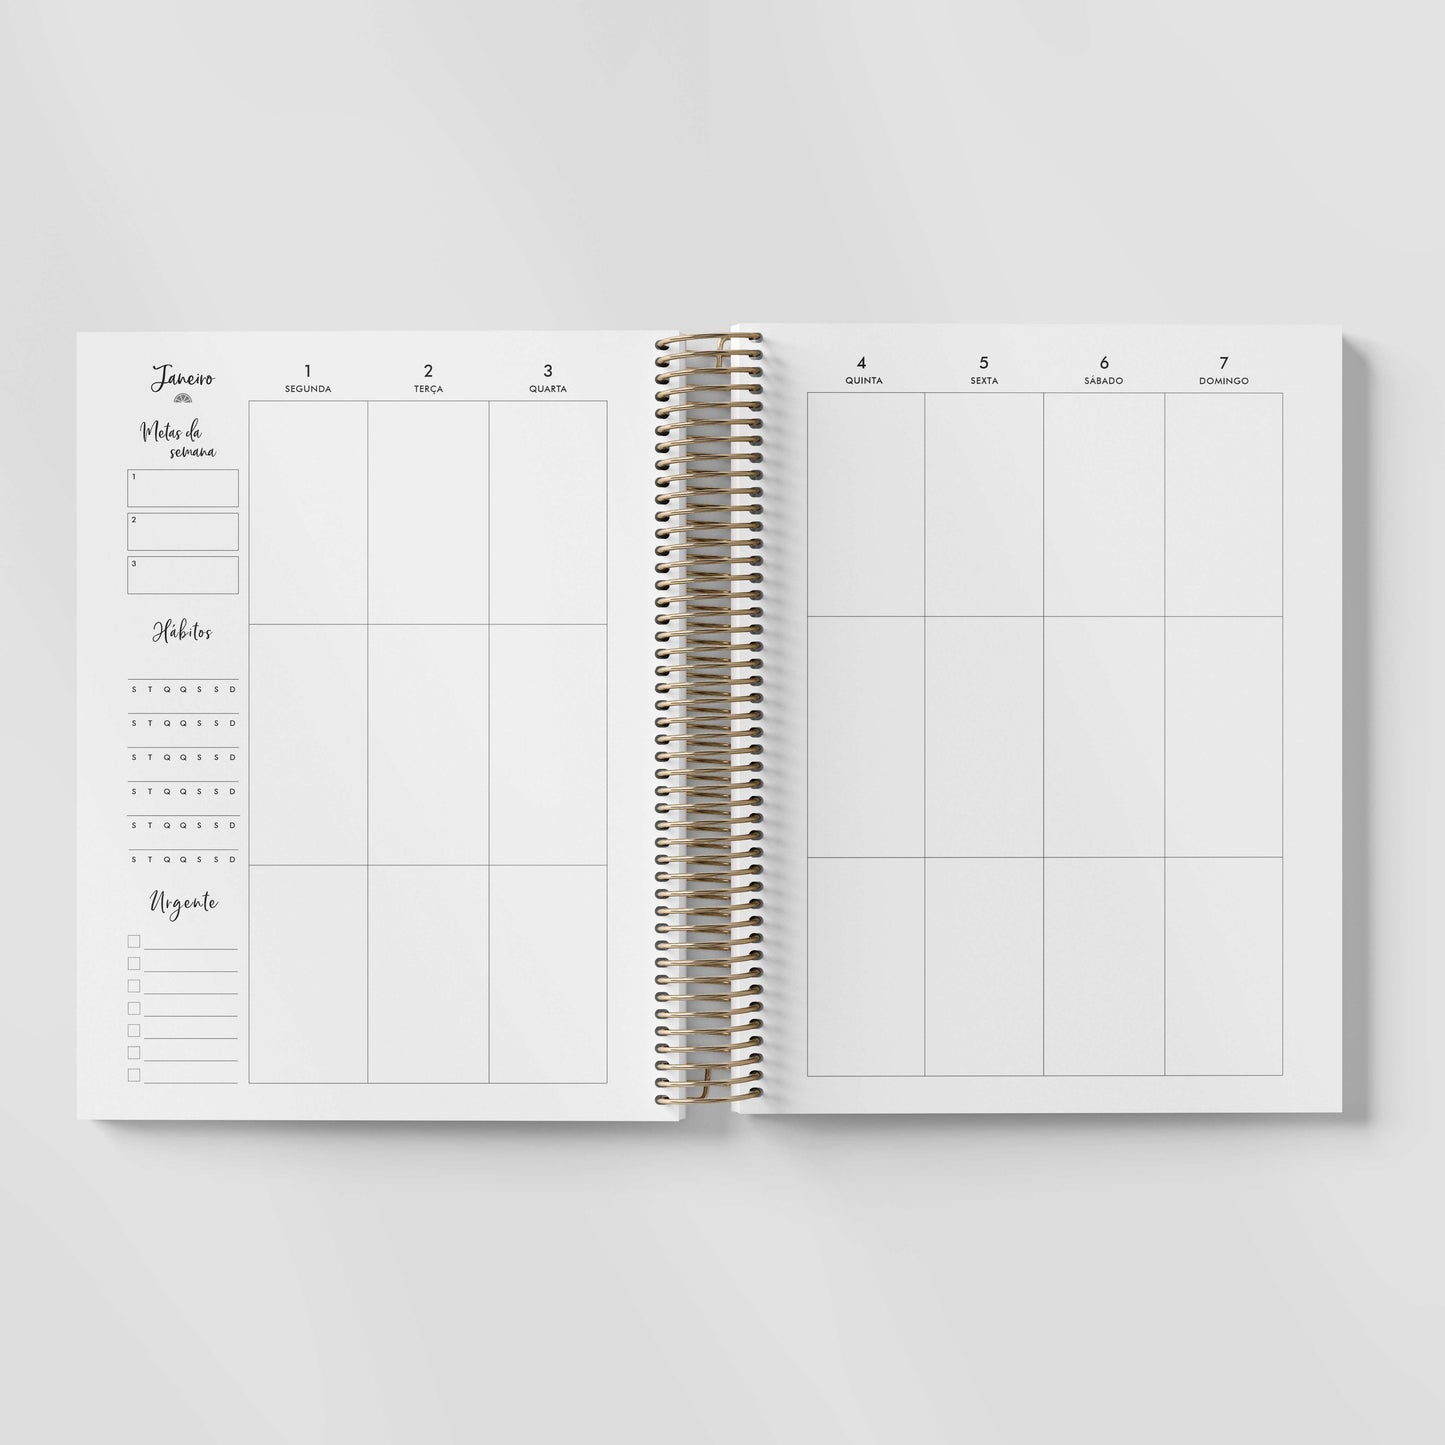 STRIPES + BOSS BABE | LIFE PLANNER 2024 * 12 MONTH AGENDA * ESPECIAL HOLIDAY SALE *